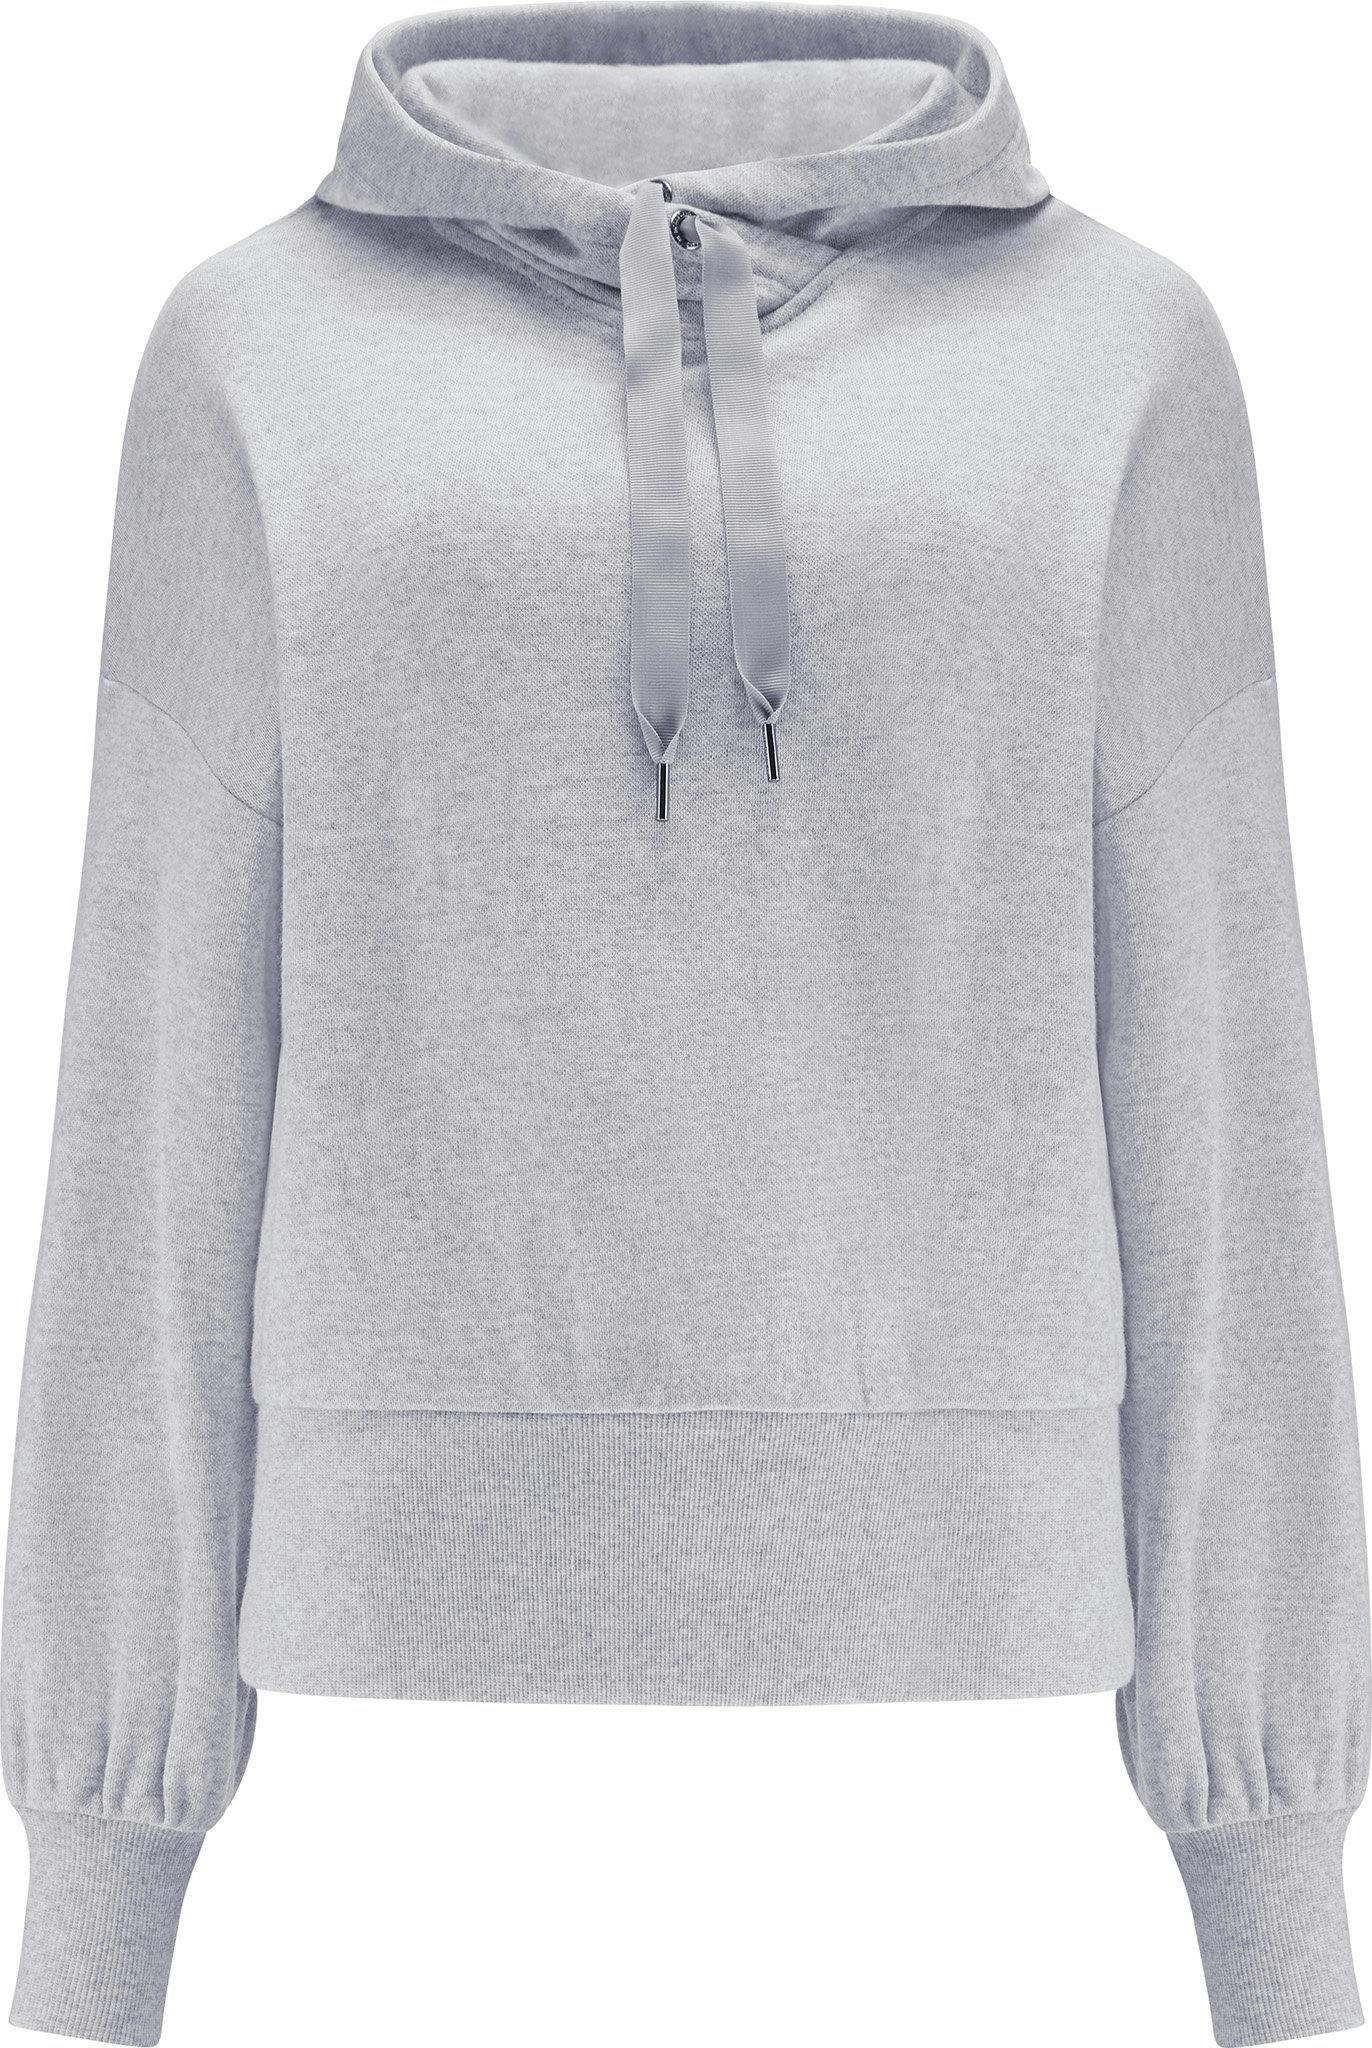 Product image for Tind Hoodie - Women's